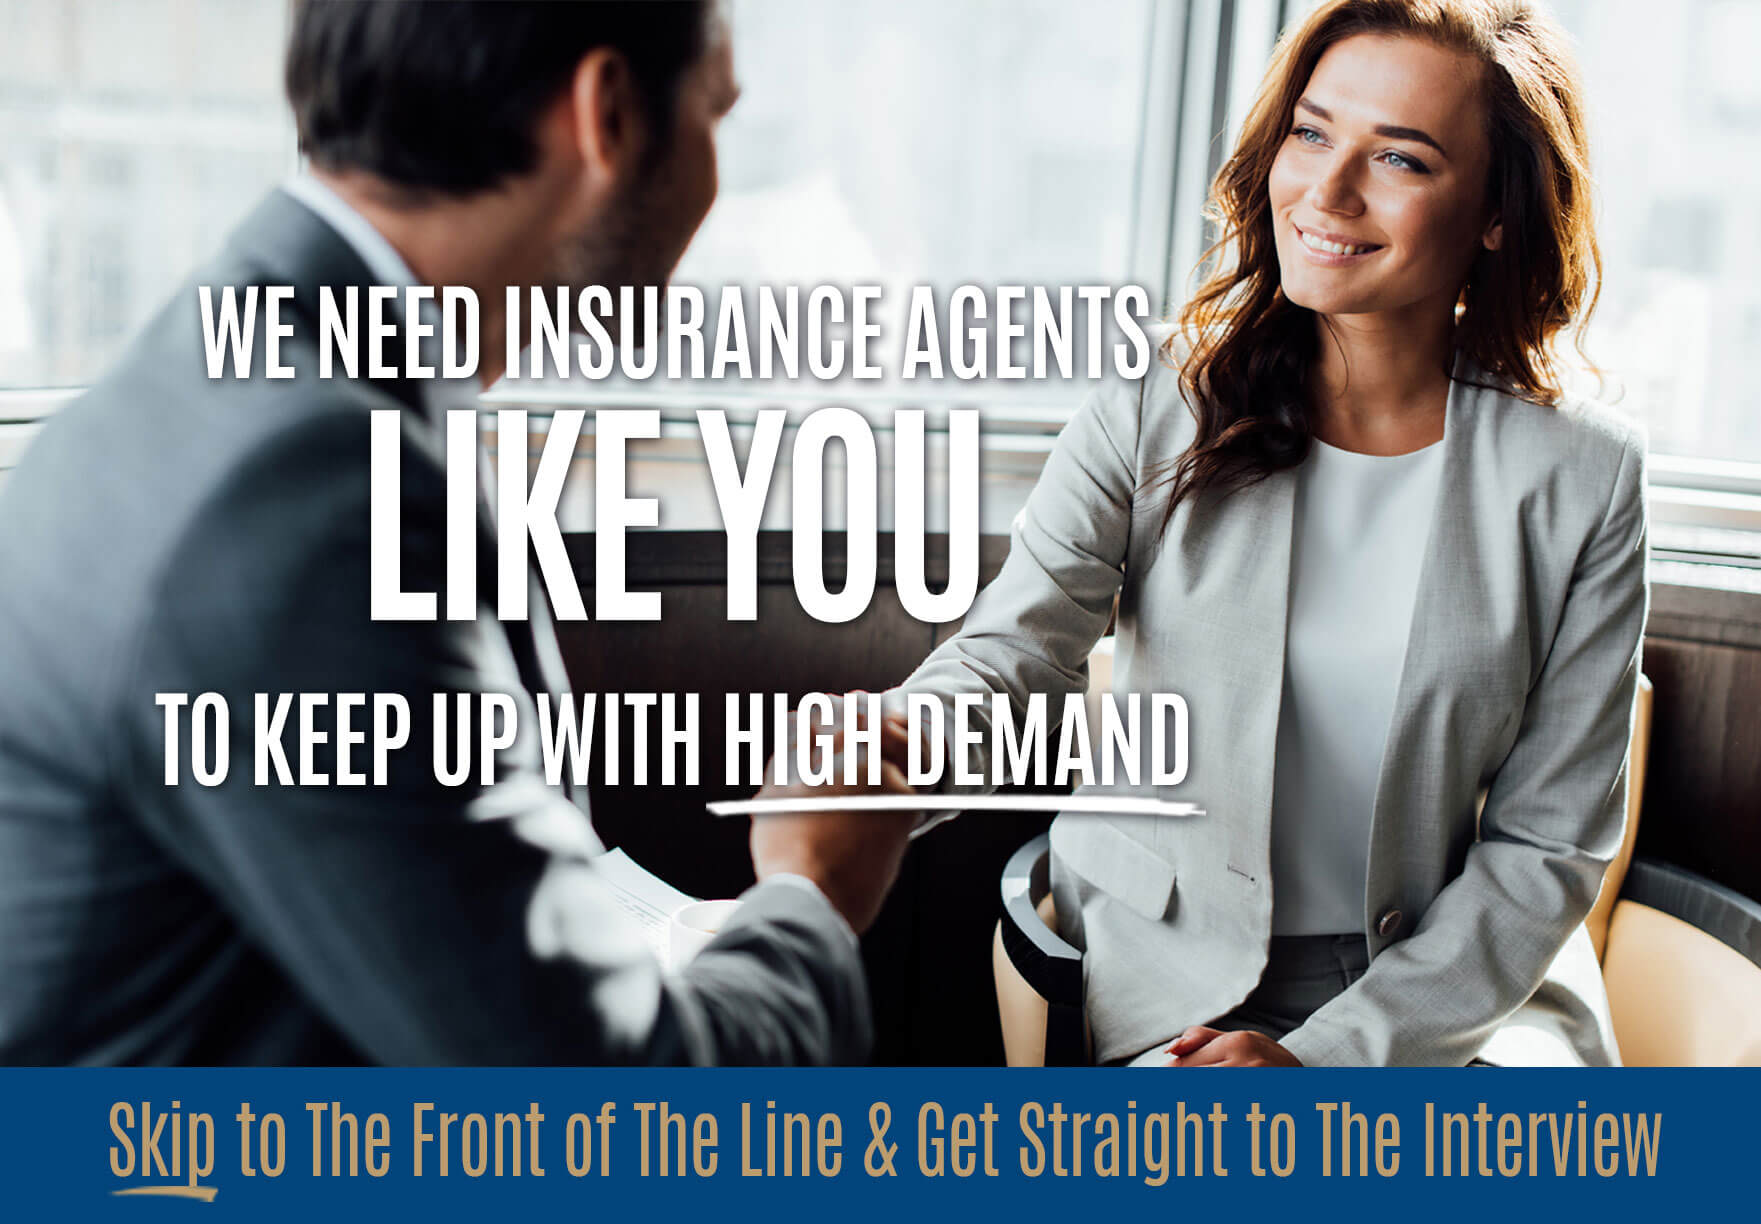 We need insurance agents like you to keep up with high demand!